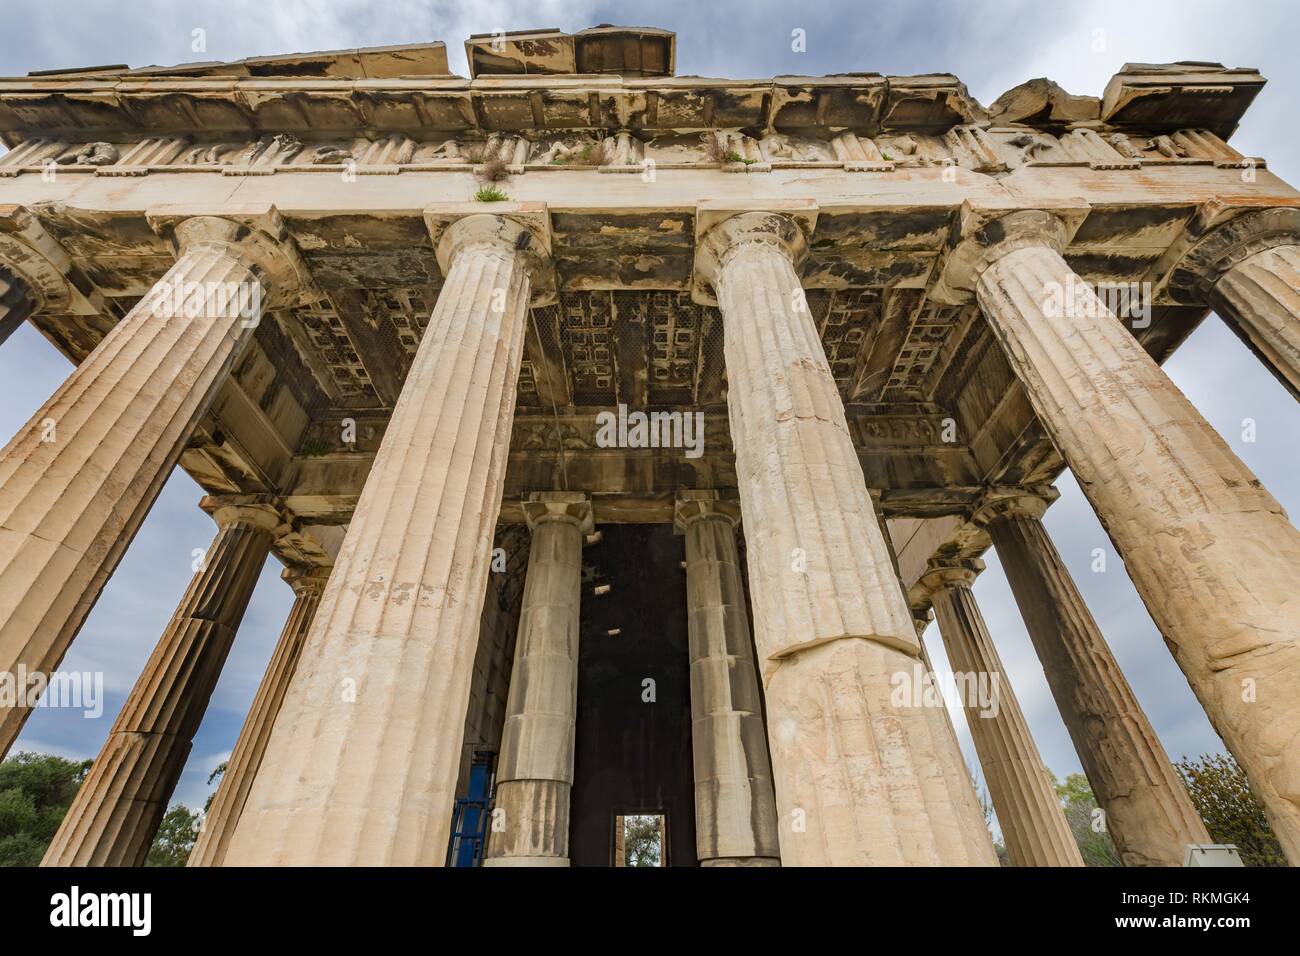 Ancient Temple of Hephaestus Columns Agora Market Place Athens Greece. Agora founded 6th Century BC. Temple for God of craftsmanship, metal working Stock Photo